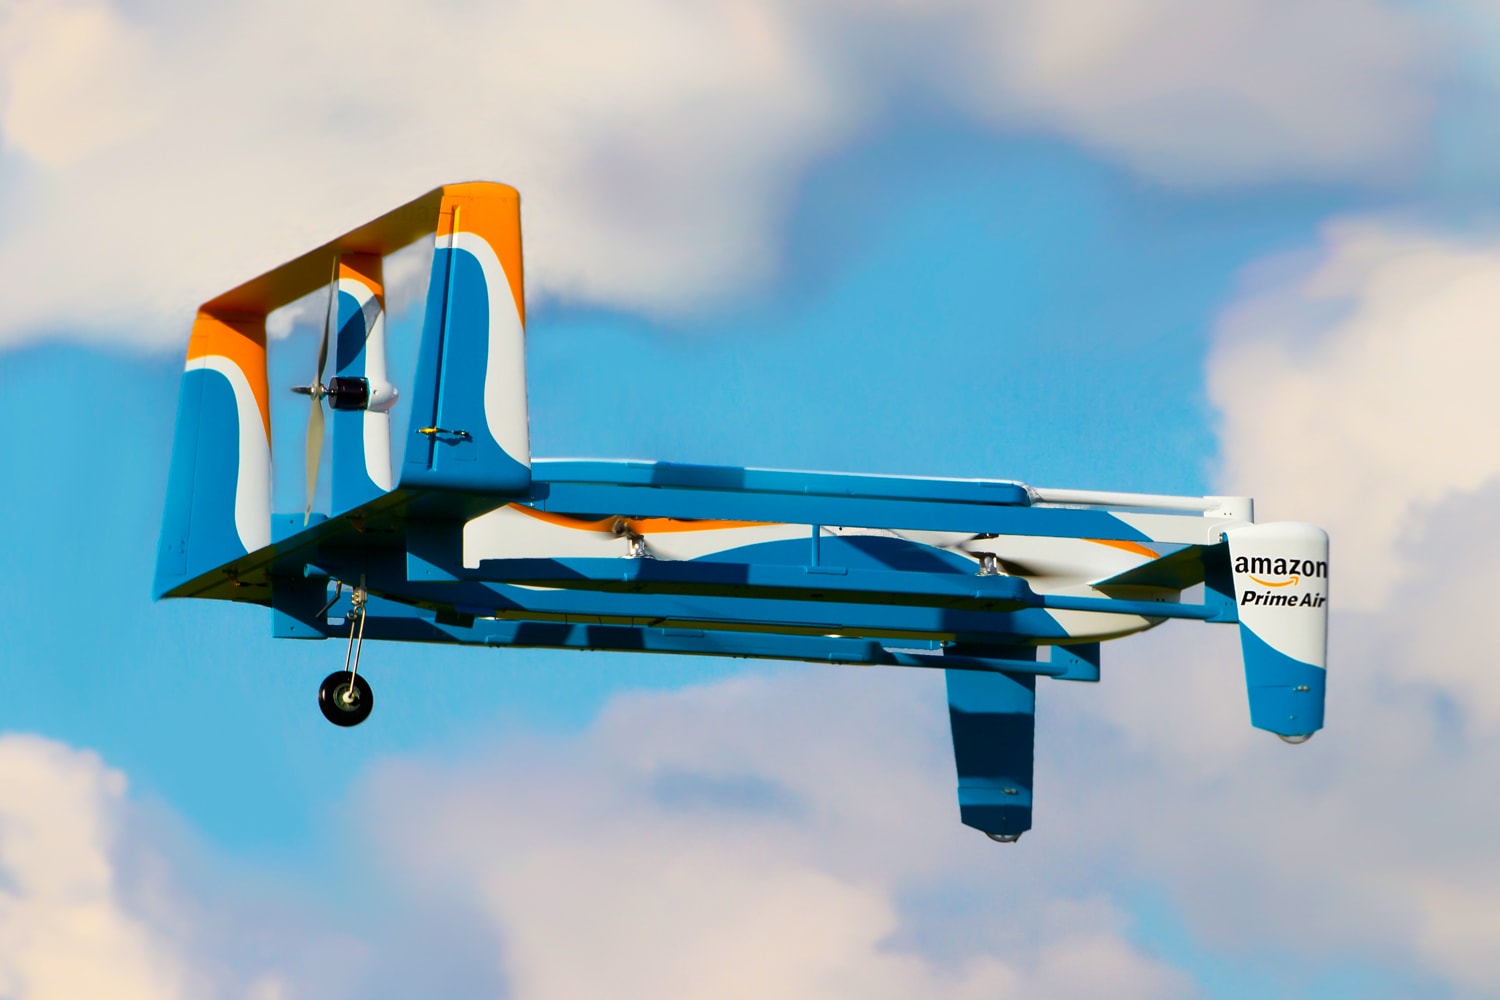 Amazon Prime Air Patent Delivery Drones Hijack-Proof Jeff Bezos nefarious individuals heartbeat feature